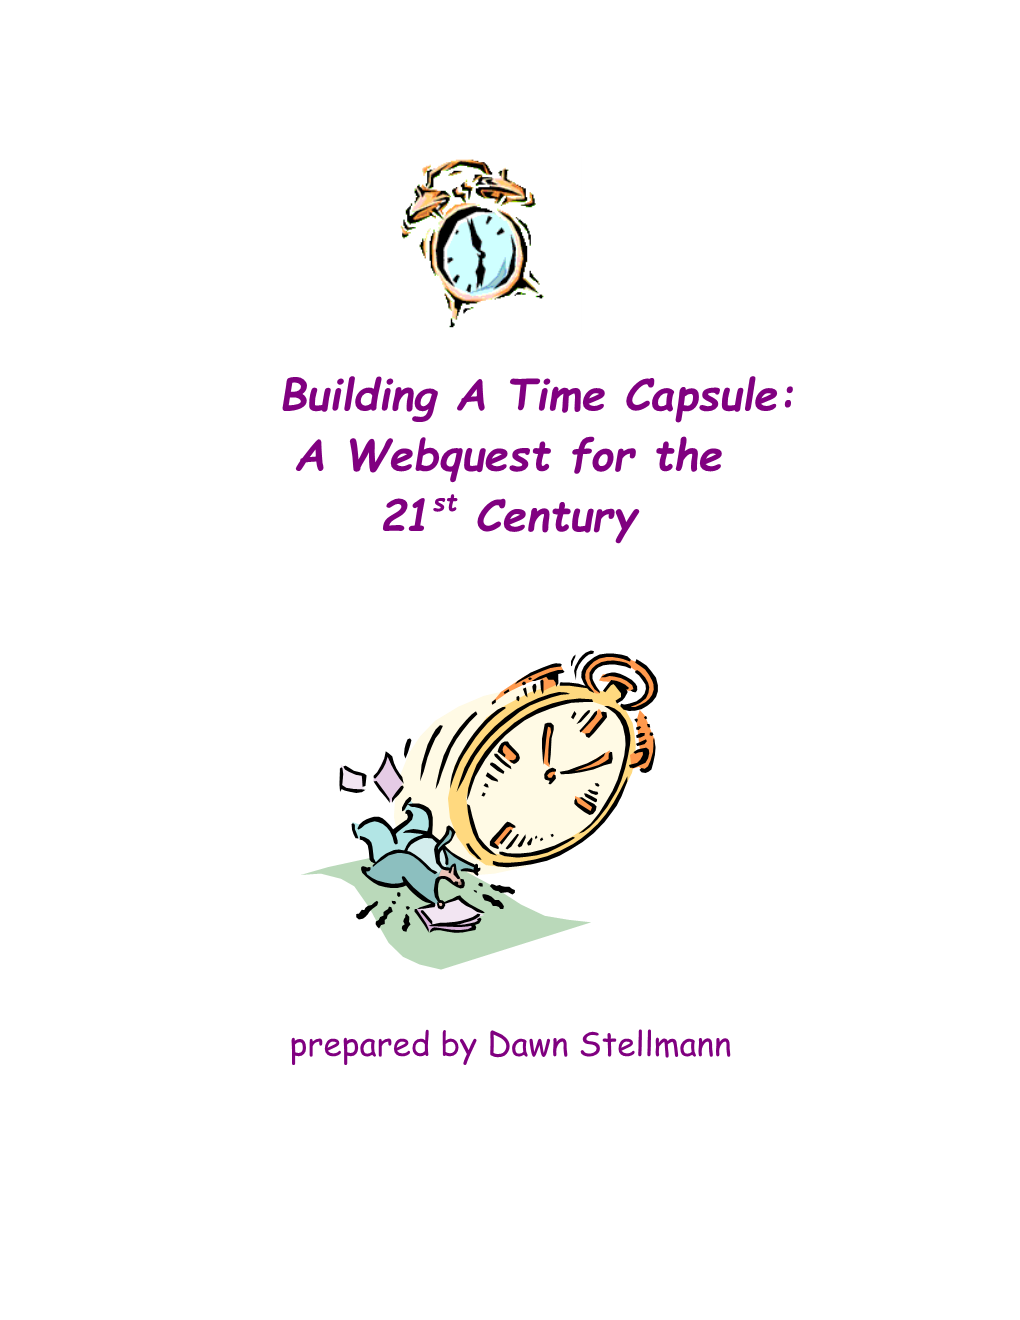 Building a Time Capsule